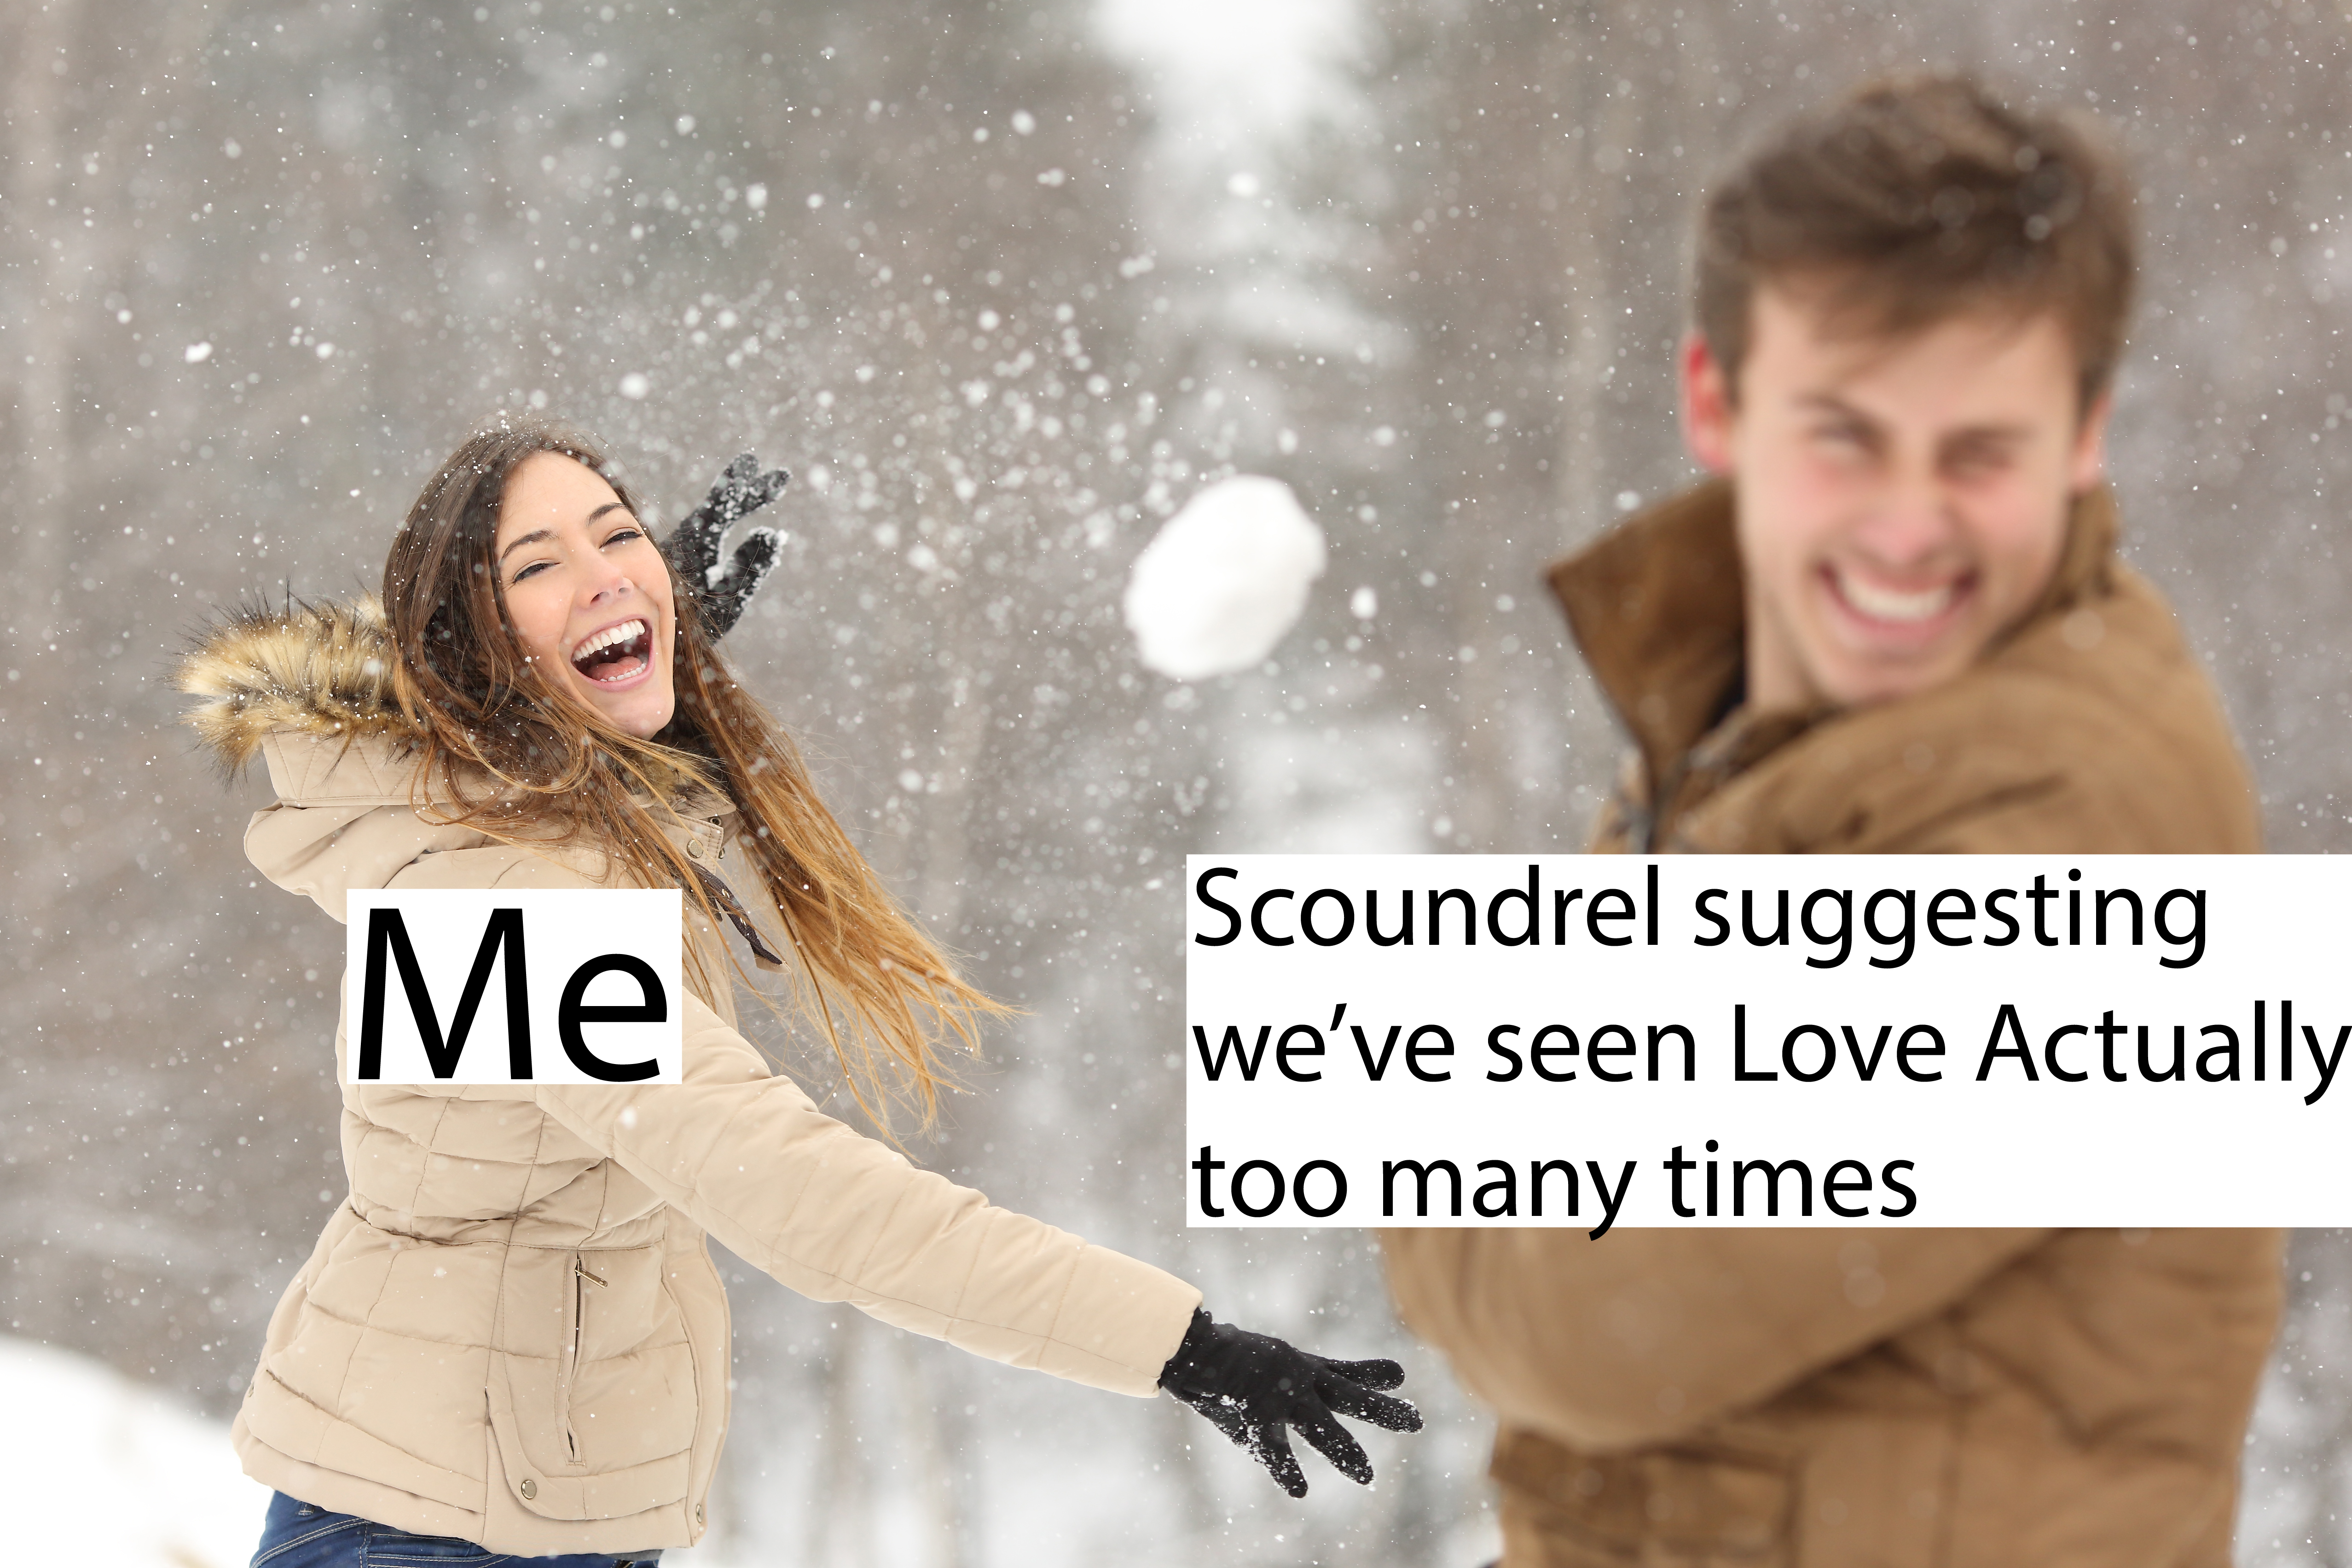 Couple playing with snow and girlfriend throwing a ball in winter holidays